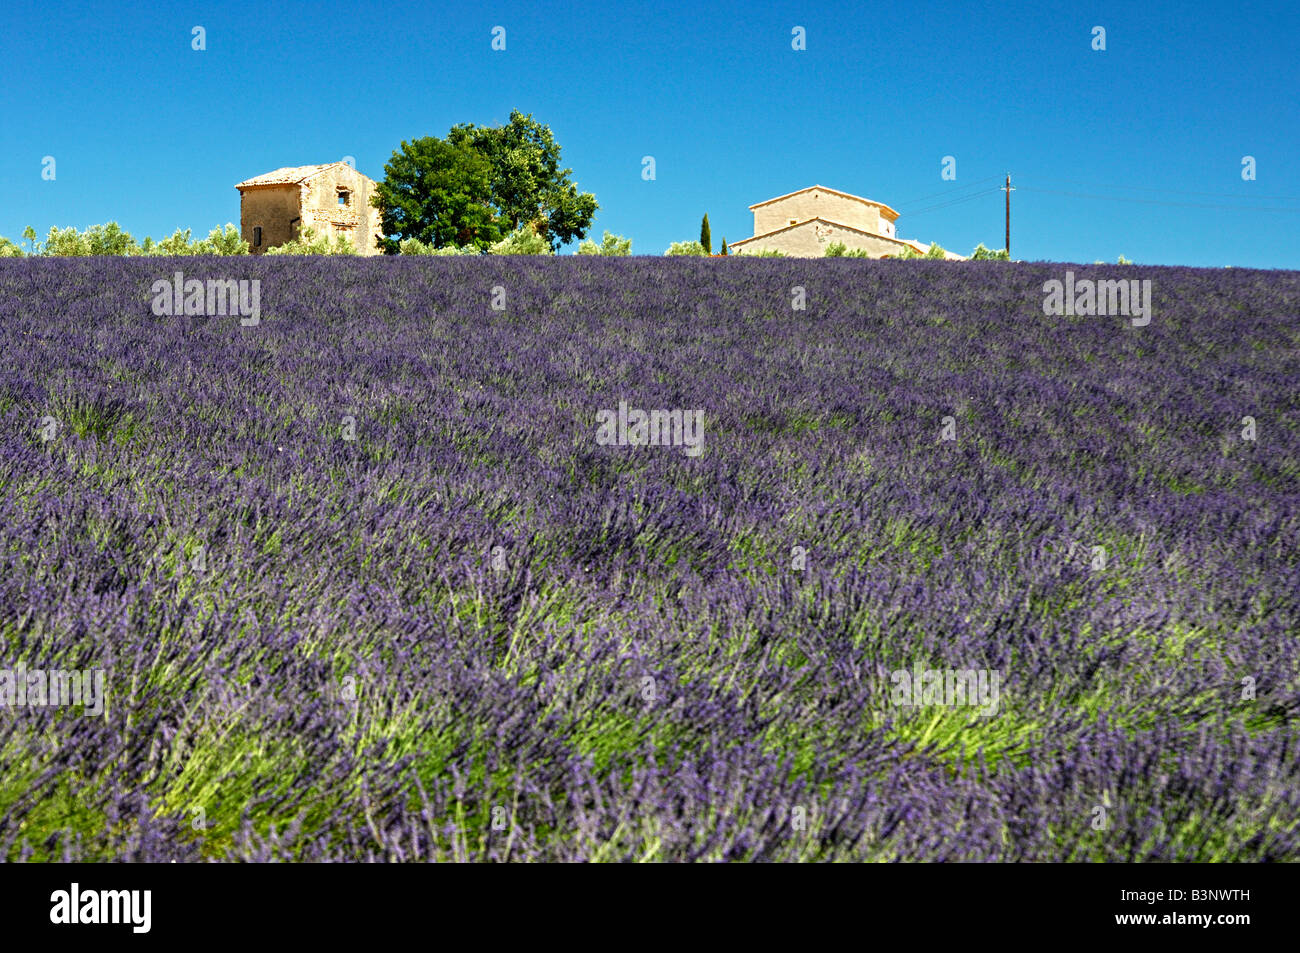 Old farm buildings at the border of a Lavender field, Plateau de Valensole, Provence, France Stock Photo